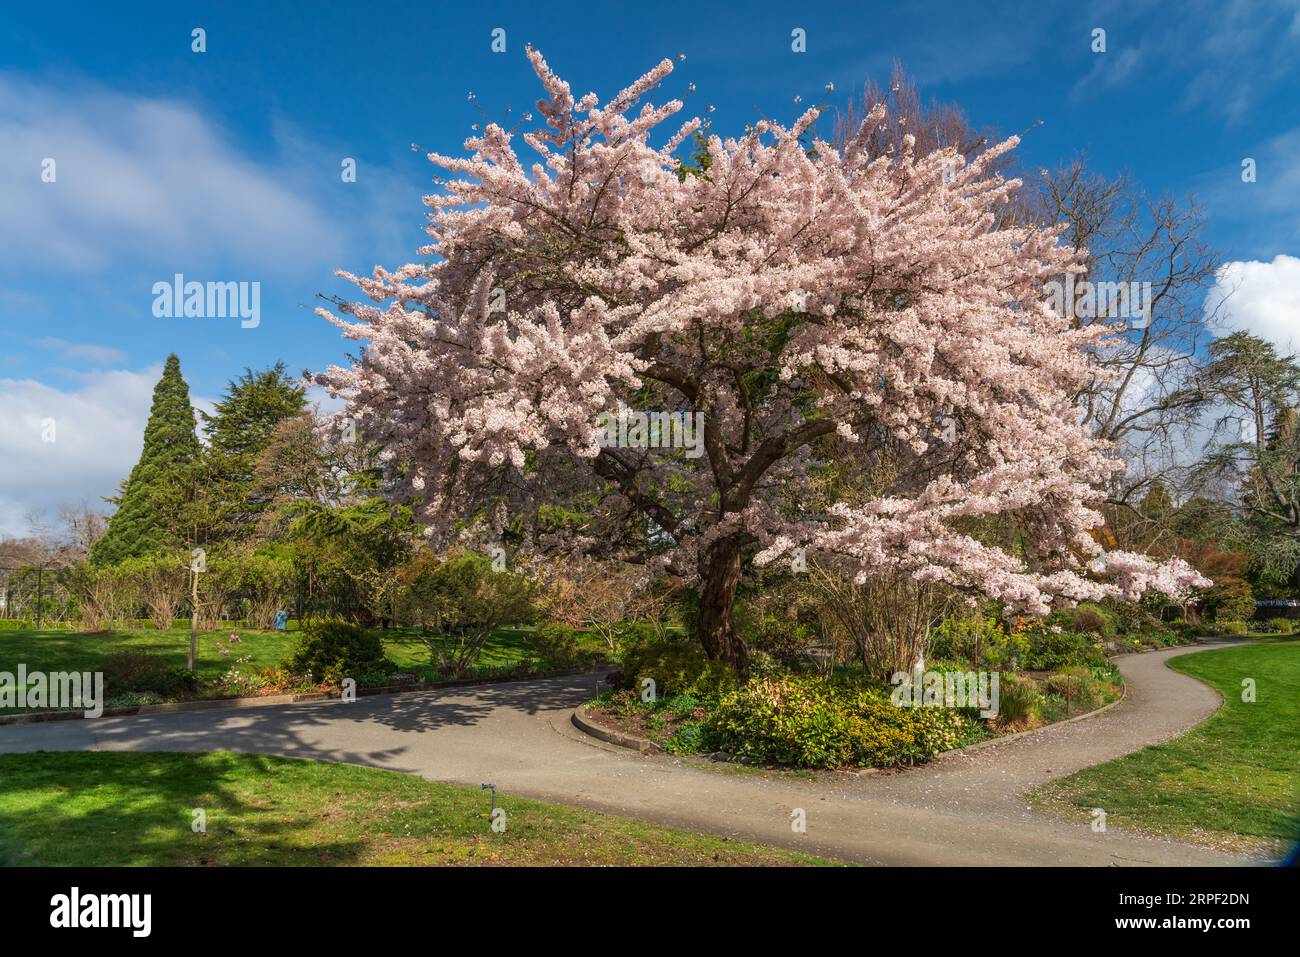 Cherry tree blossoms at the botanical gardens at Government House in Victoria, Vancouver Island, British Columbia, Canada. Stock Photo